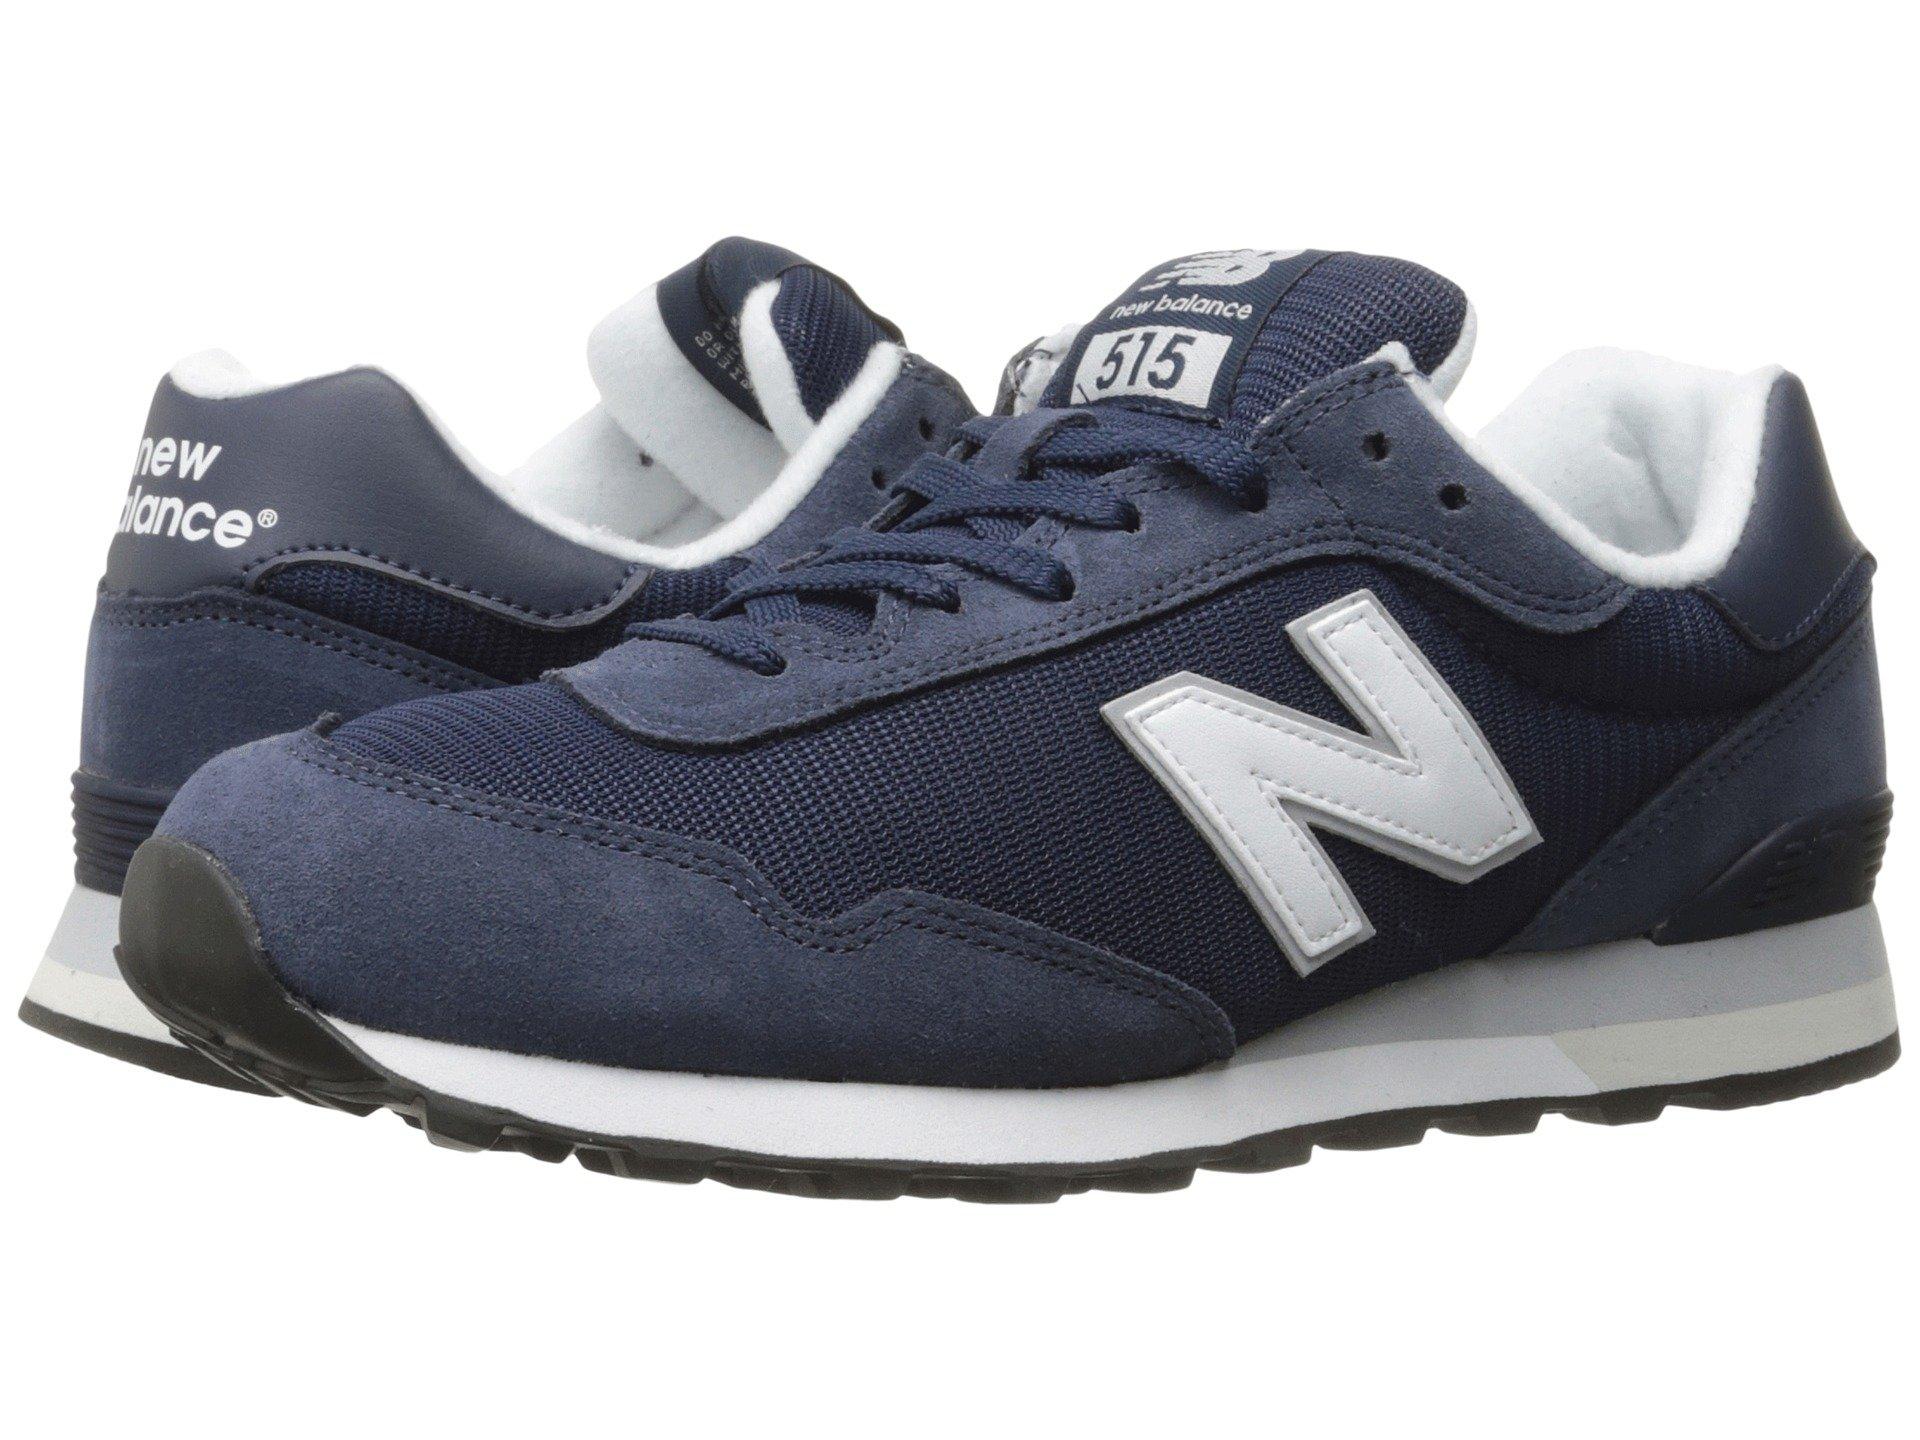 new balance 515 classic homme